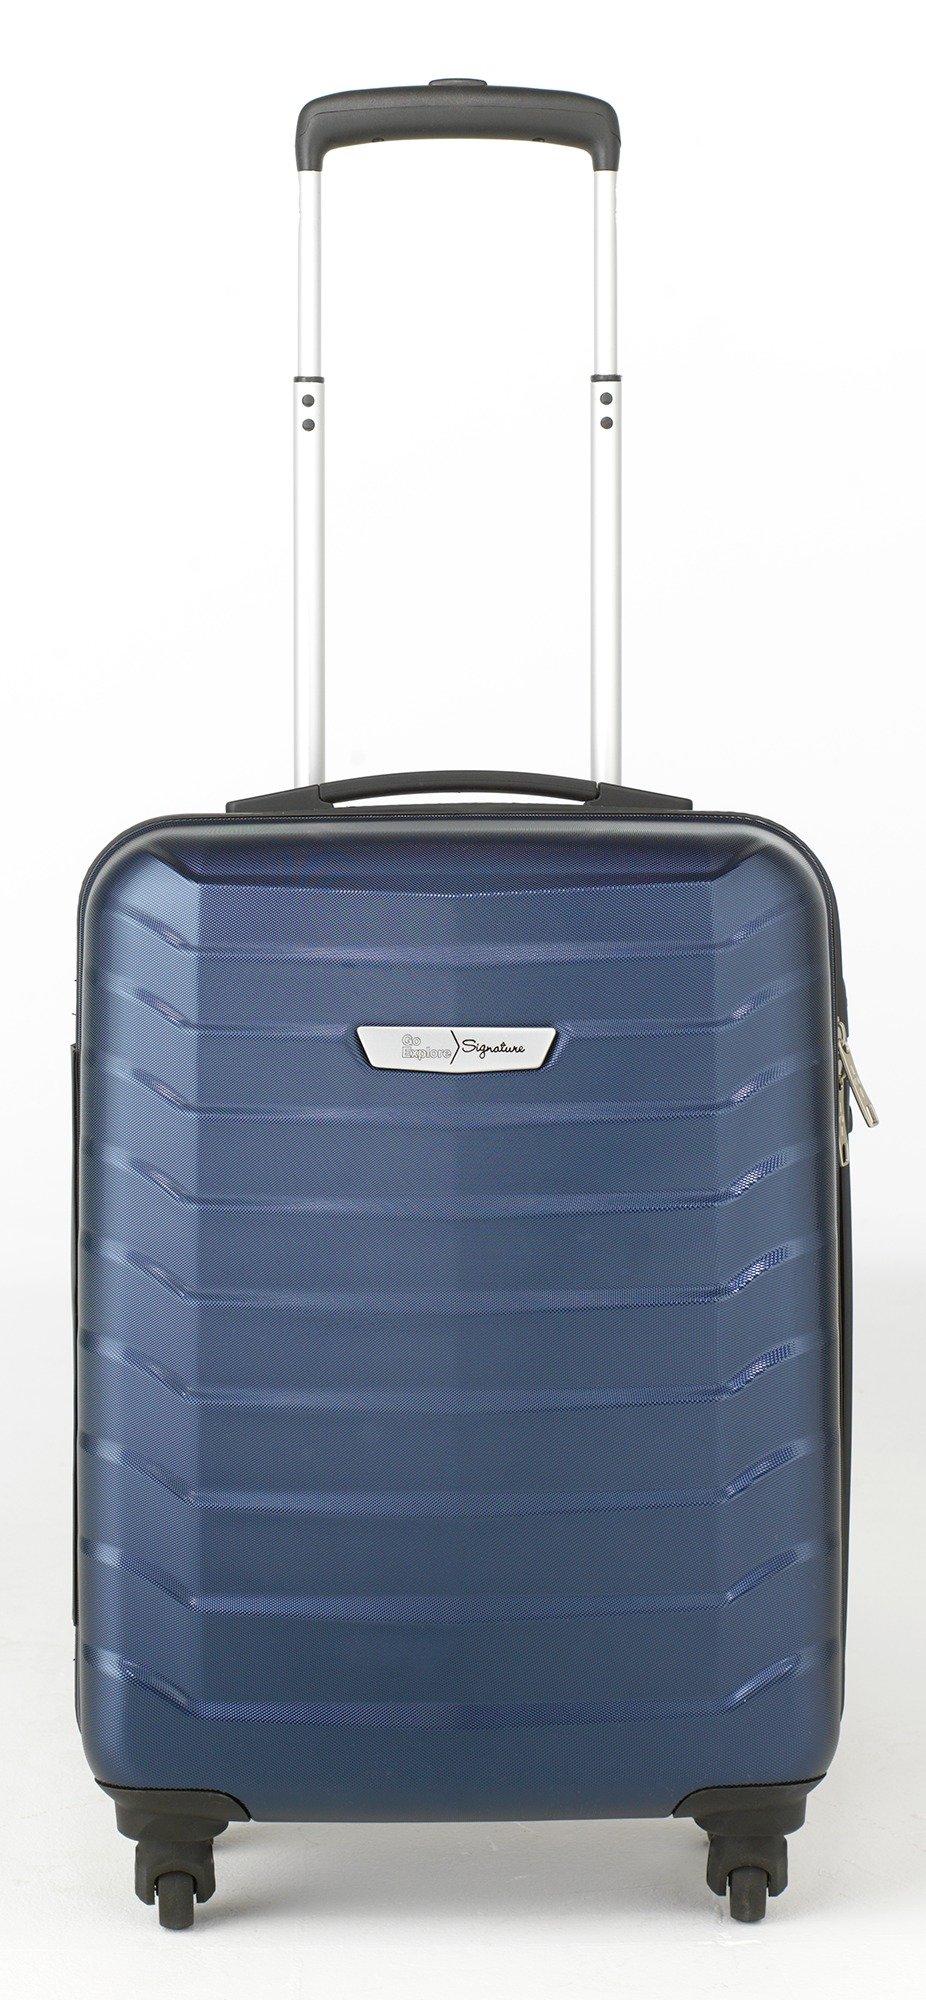 Buy Antler Suitcases at Argos.co.uk - Your Online Shop for Sports and ...